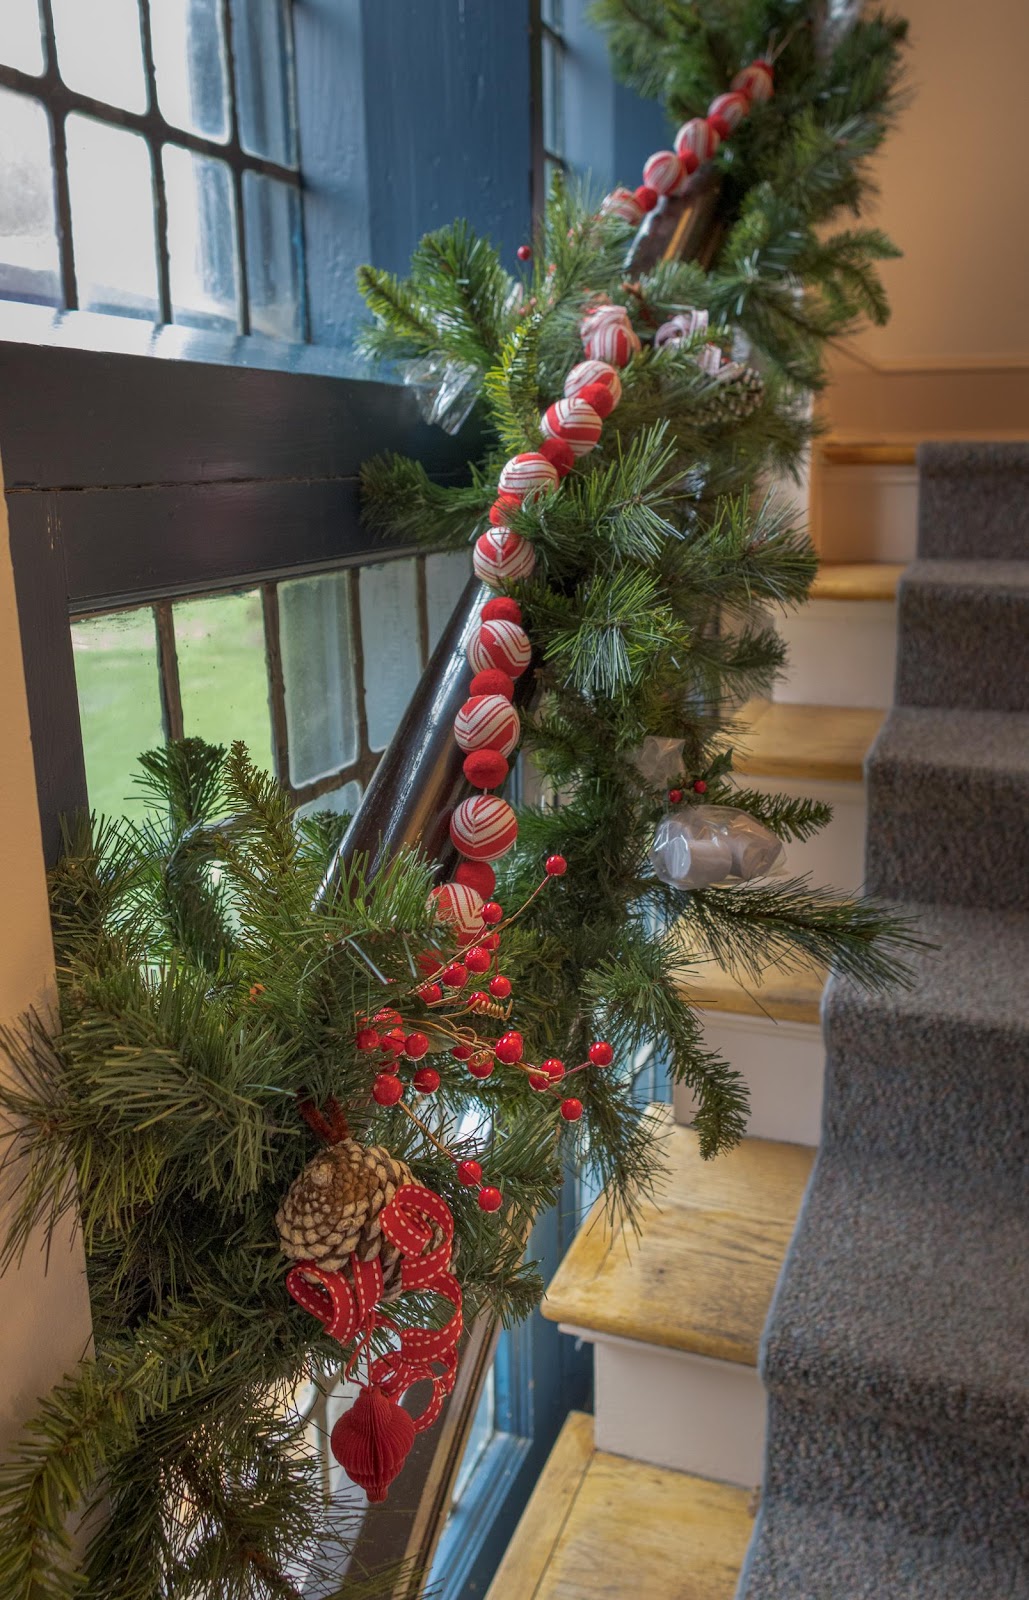 This recent holiday season, the Sussex Gardeners designed festive arrangements with live plants to decorate the Zwaanendael Museum.